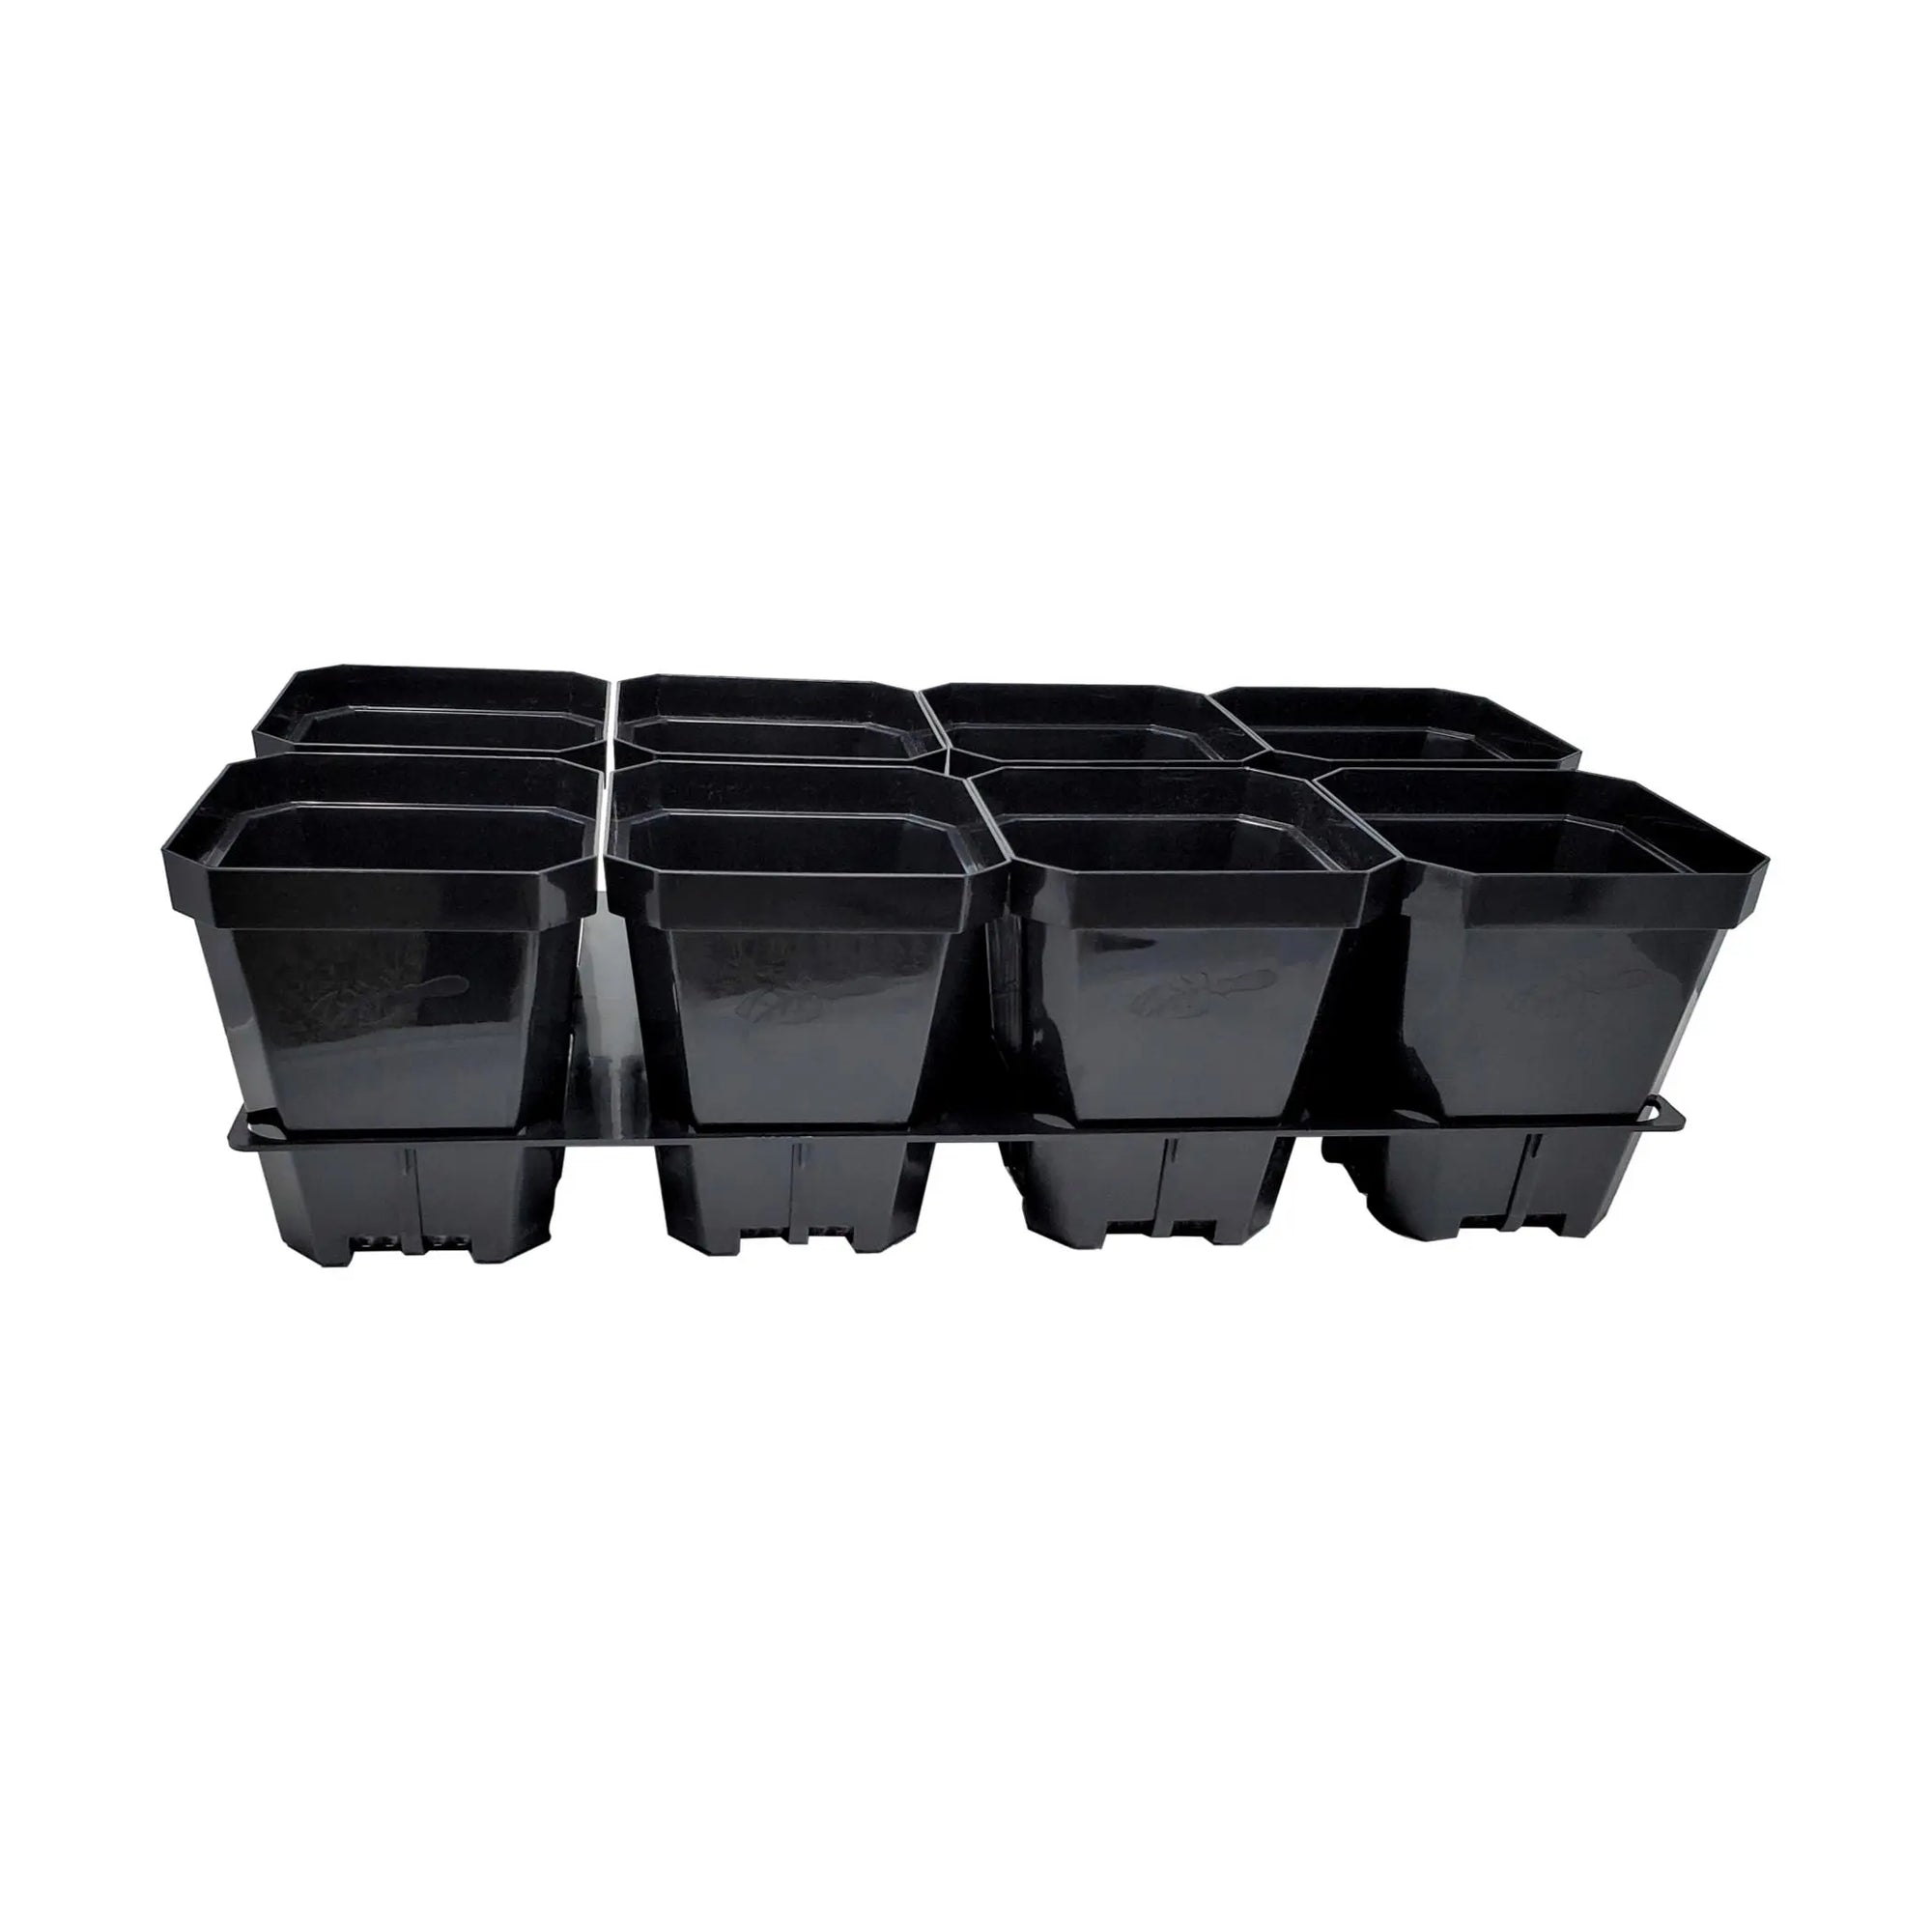 5" seed starting pots in insert